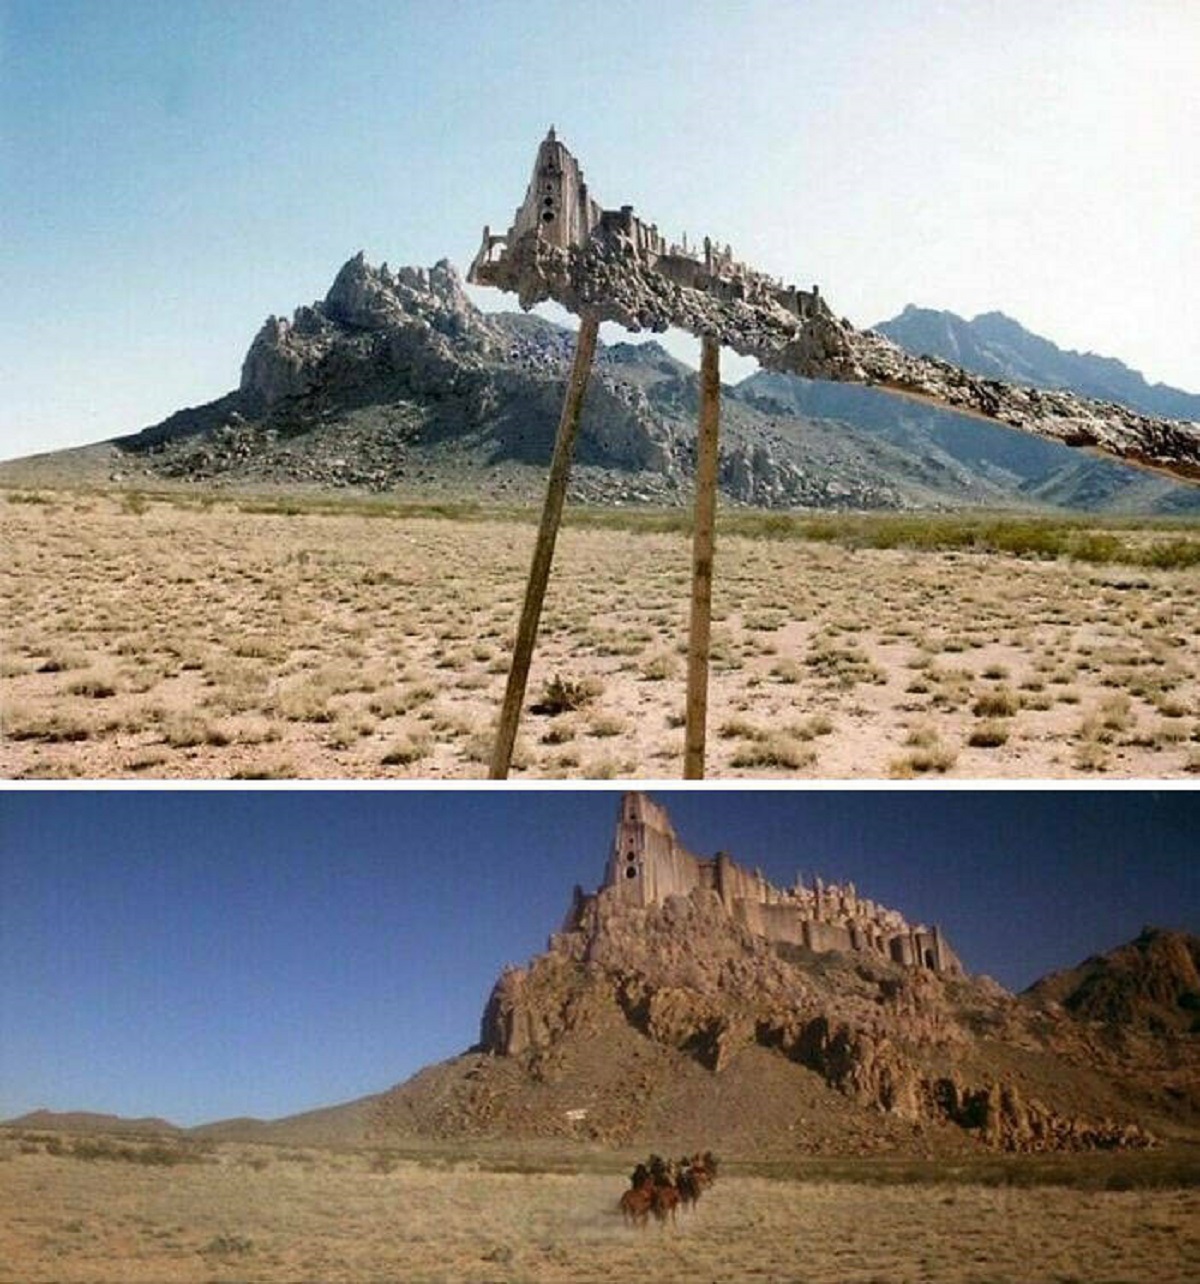 "A Terrific Foreground Miniature By Spanish Effects Maestro Emilio Ruiz Del Río For Conan The Destroyer (1984)"